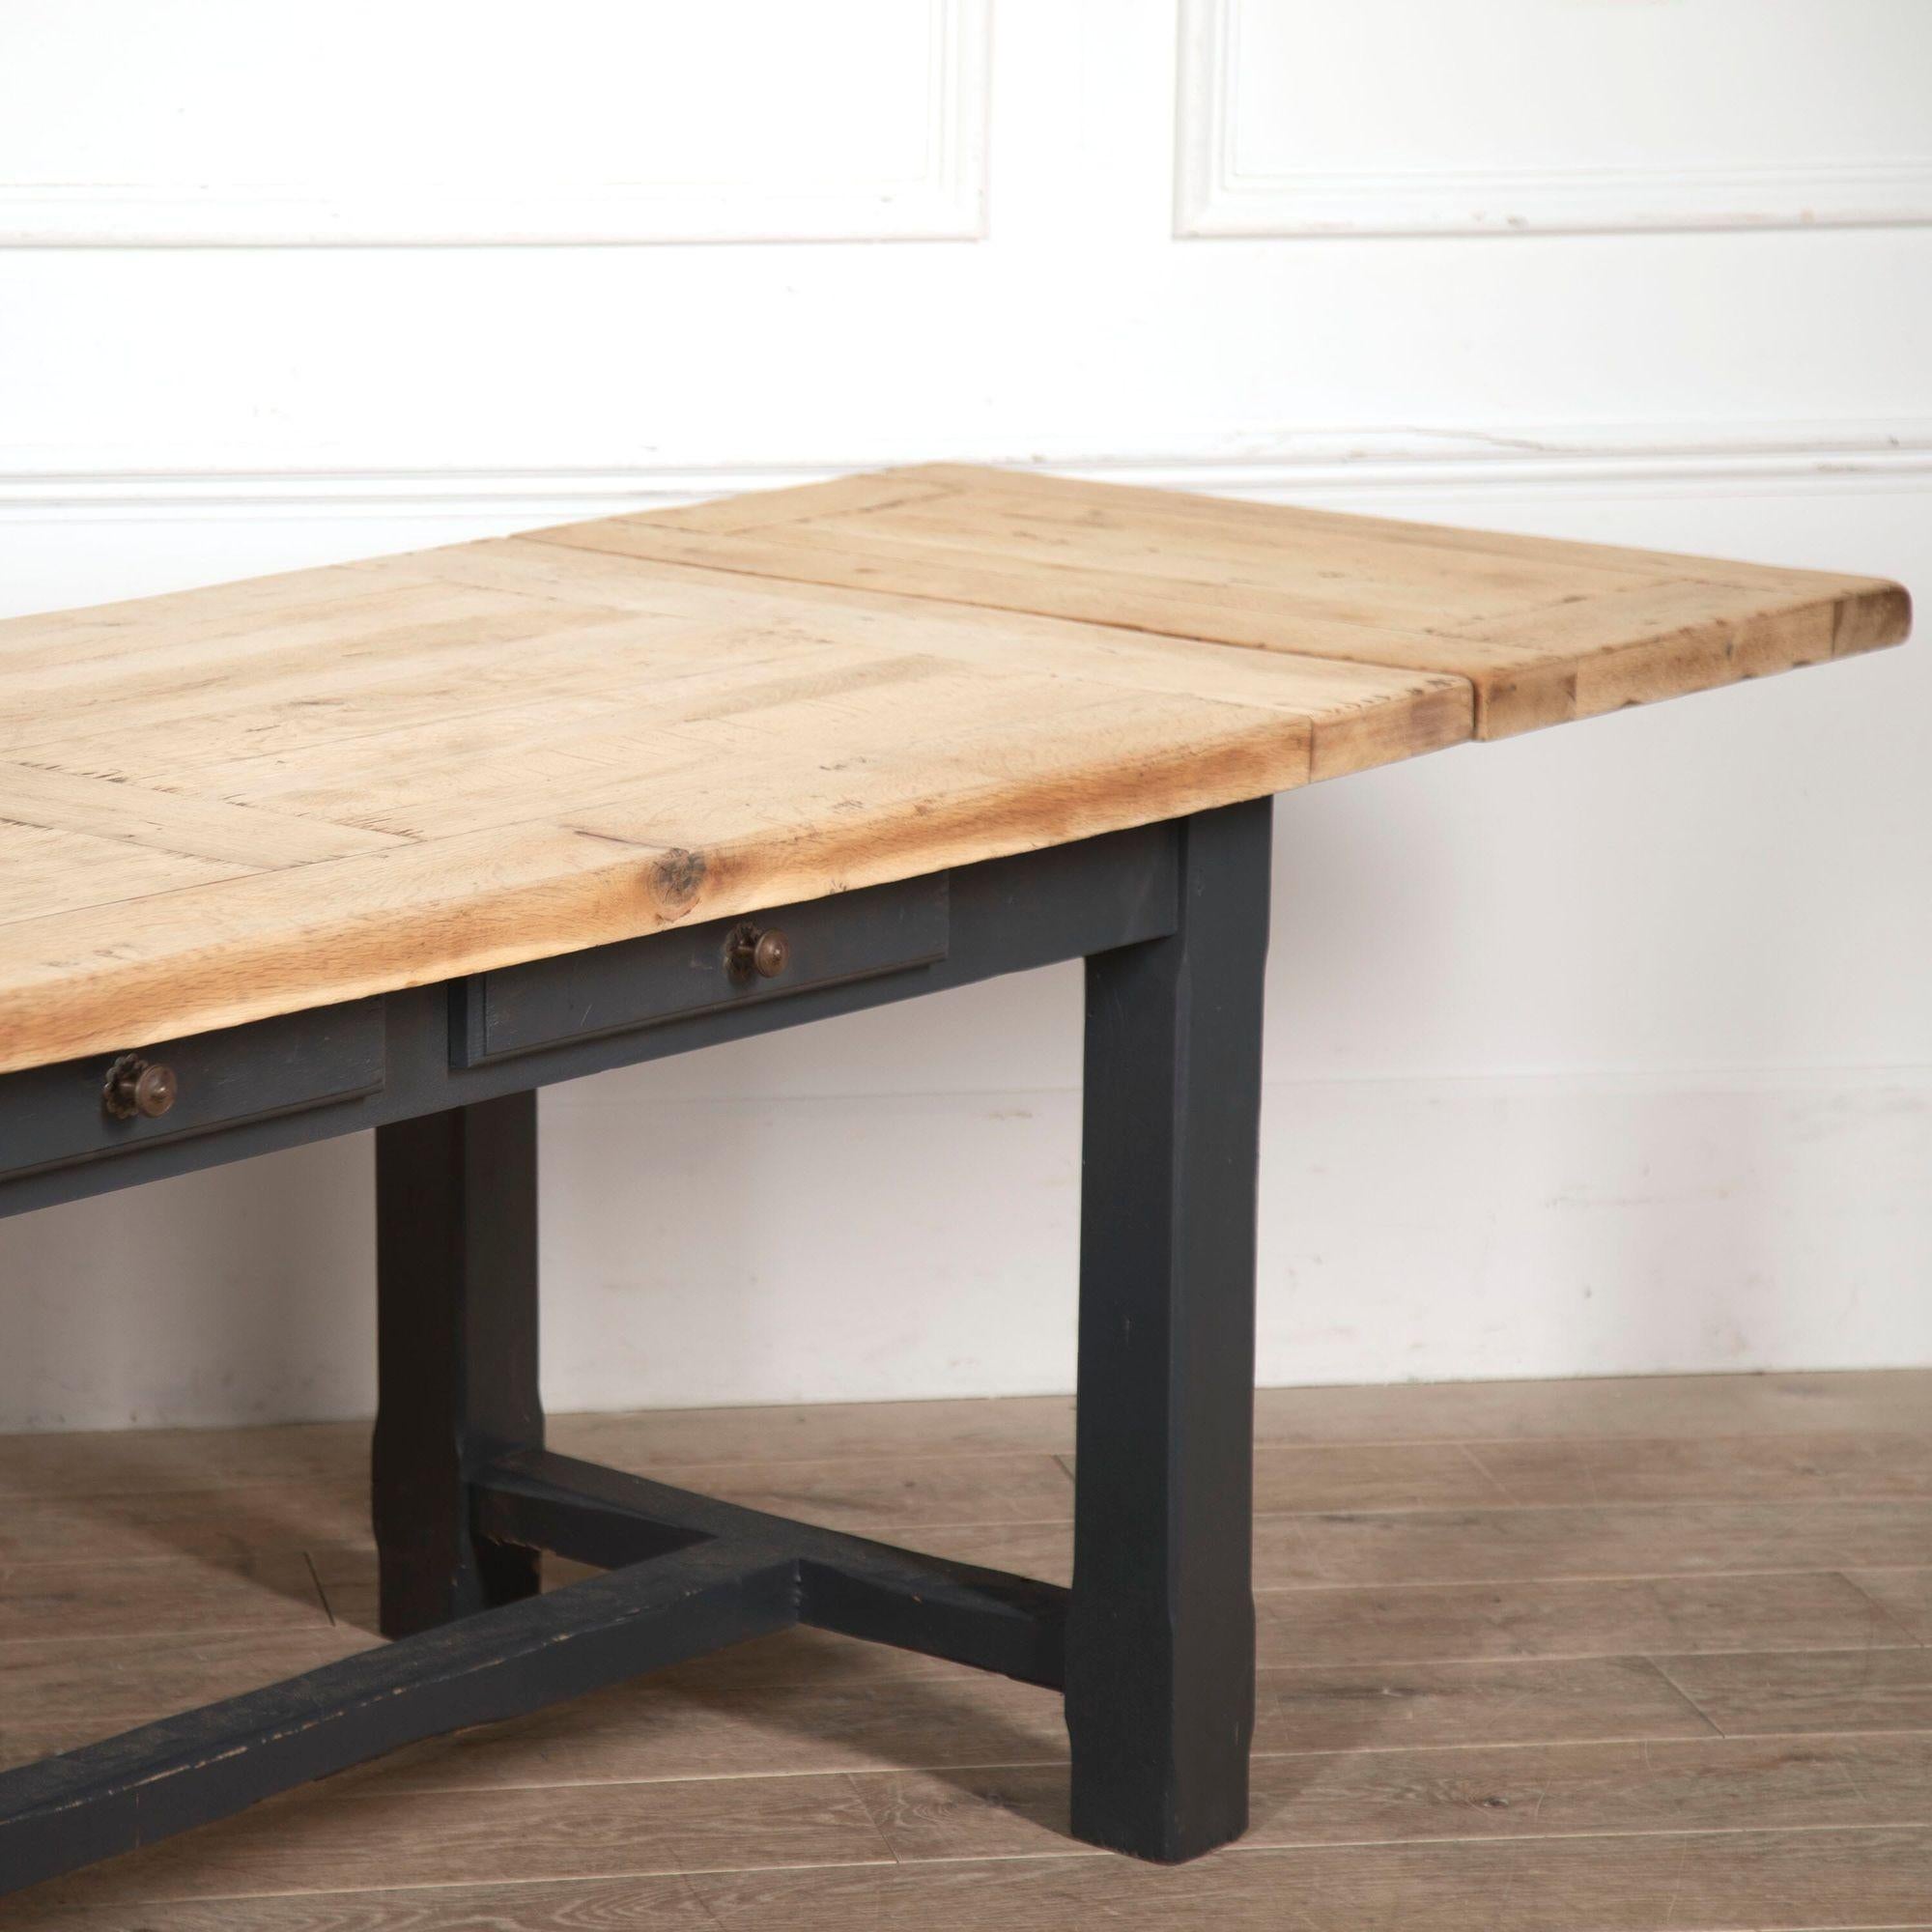 Impressive oak refectory table. 
This wonderful table has two drop-leaf extensions that are in great, structural condition. 
The top of the table has been handcrafted with thick pieces of English oak planks that measure to around 4.5cm. This table